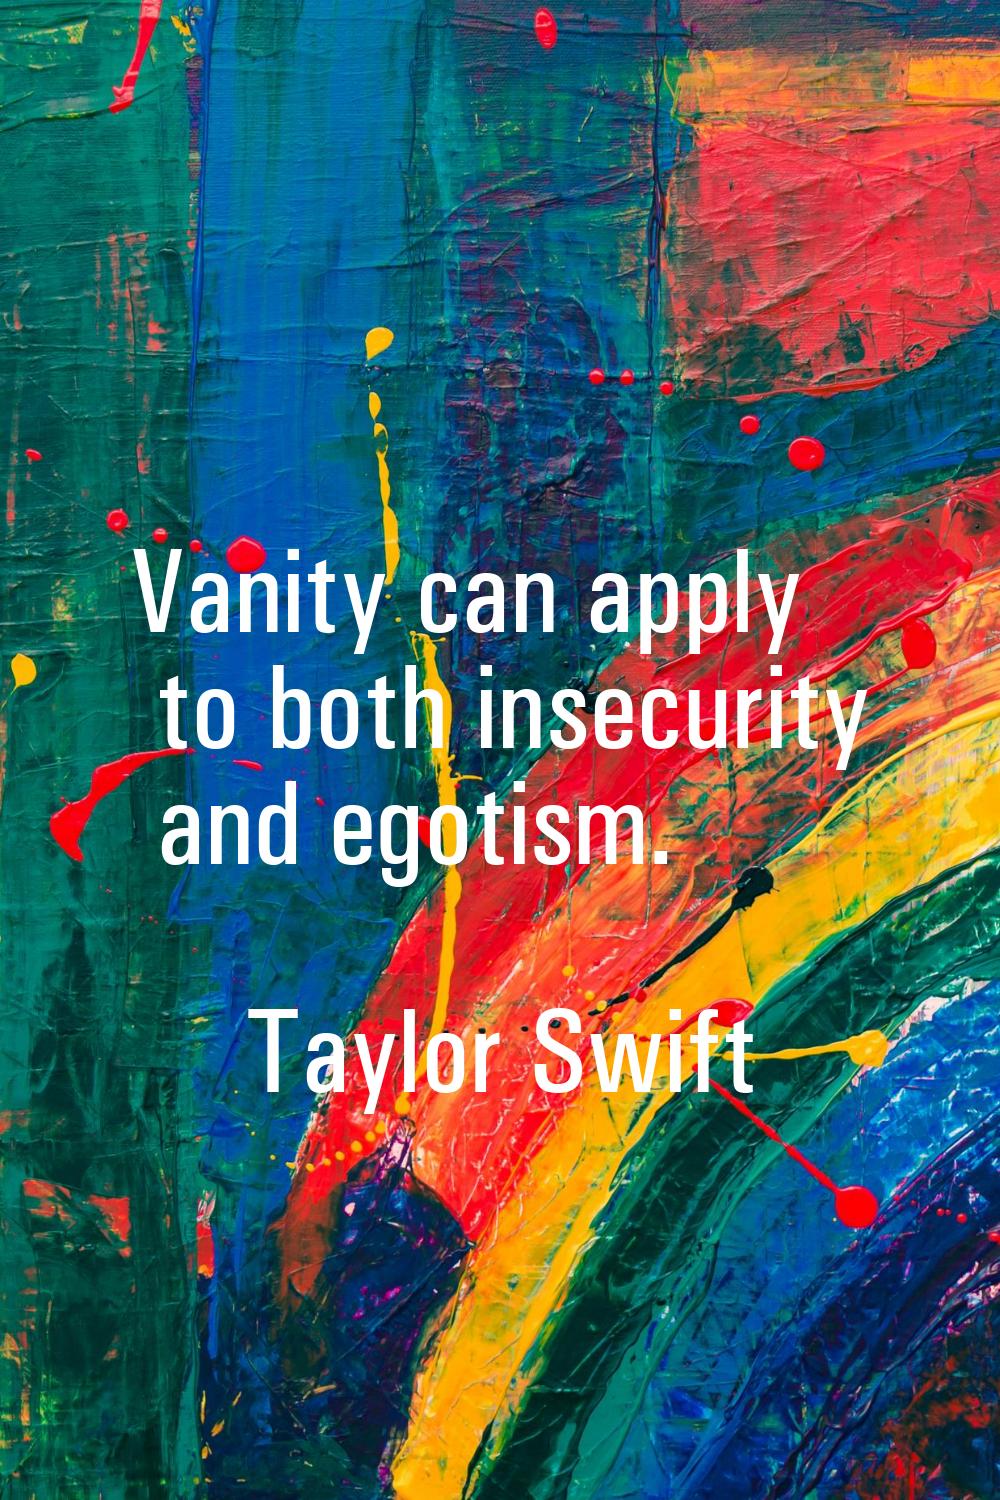 Vanity can apply to both insecurity and egotism.